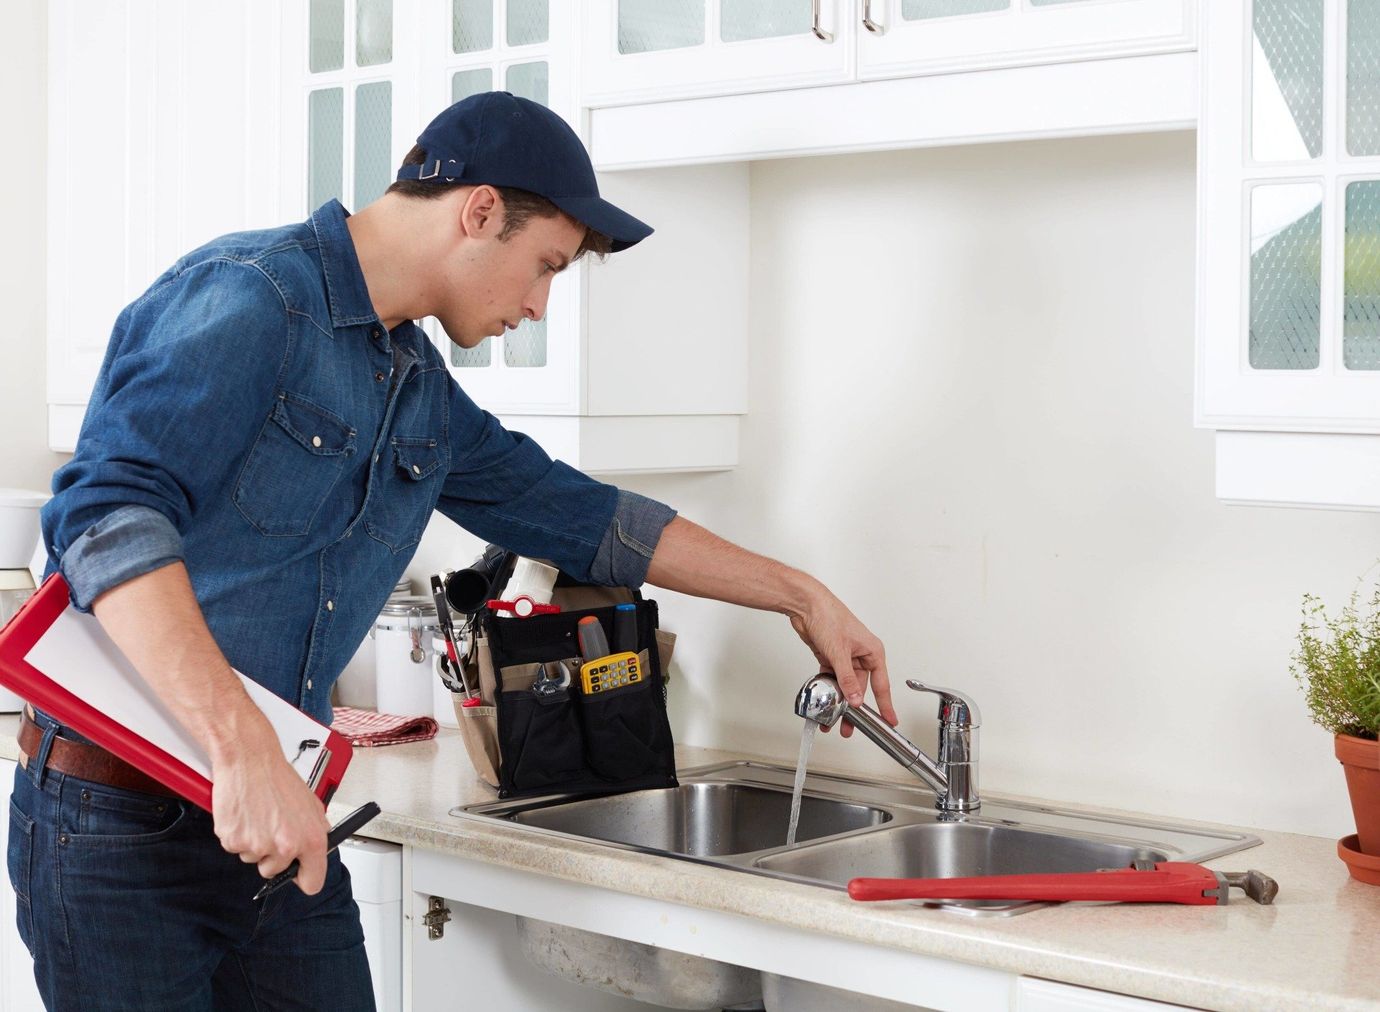 Plumber checking the sink — Plumbing services in Spanaway, WA